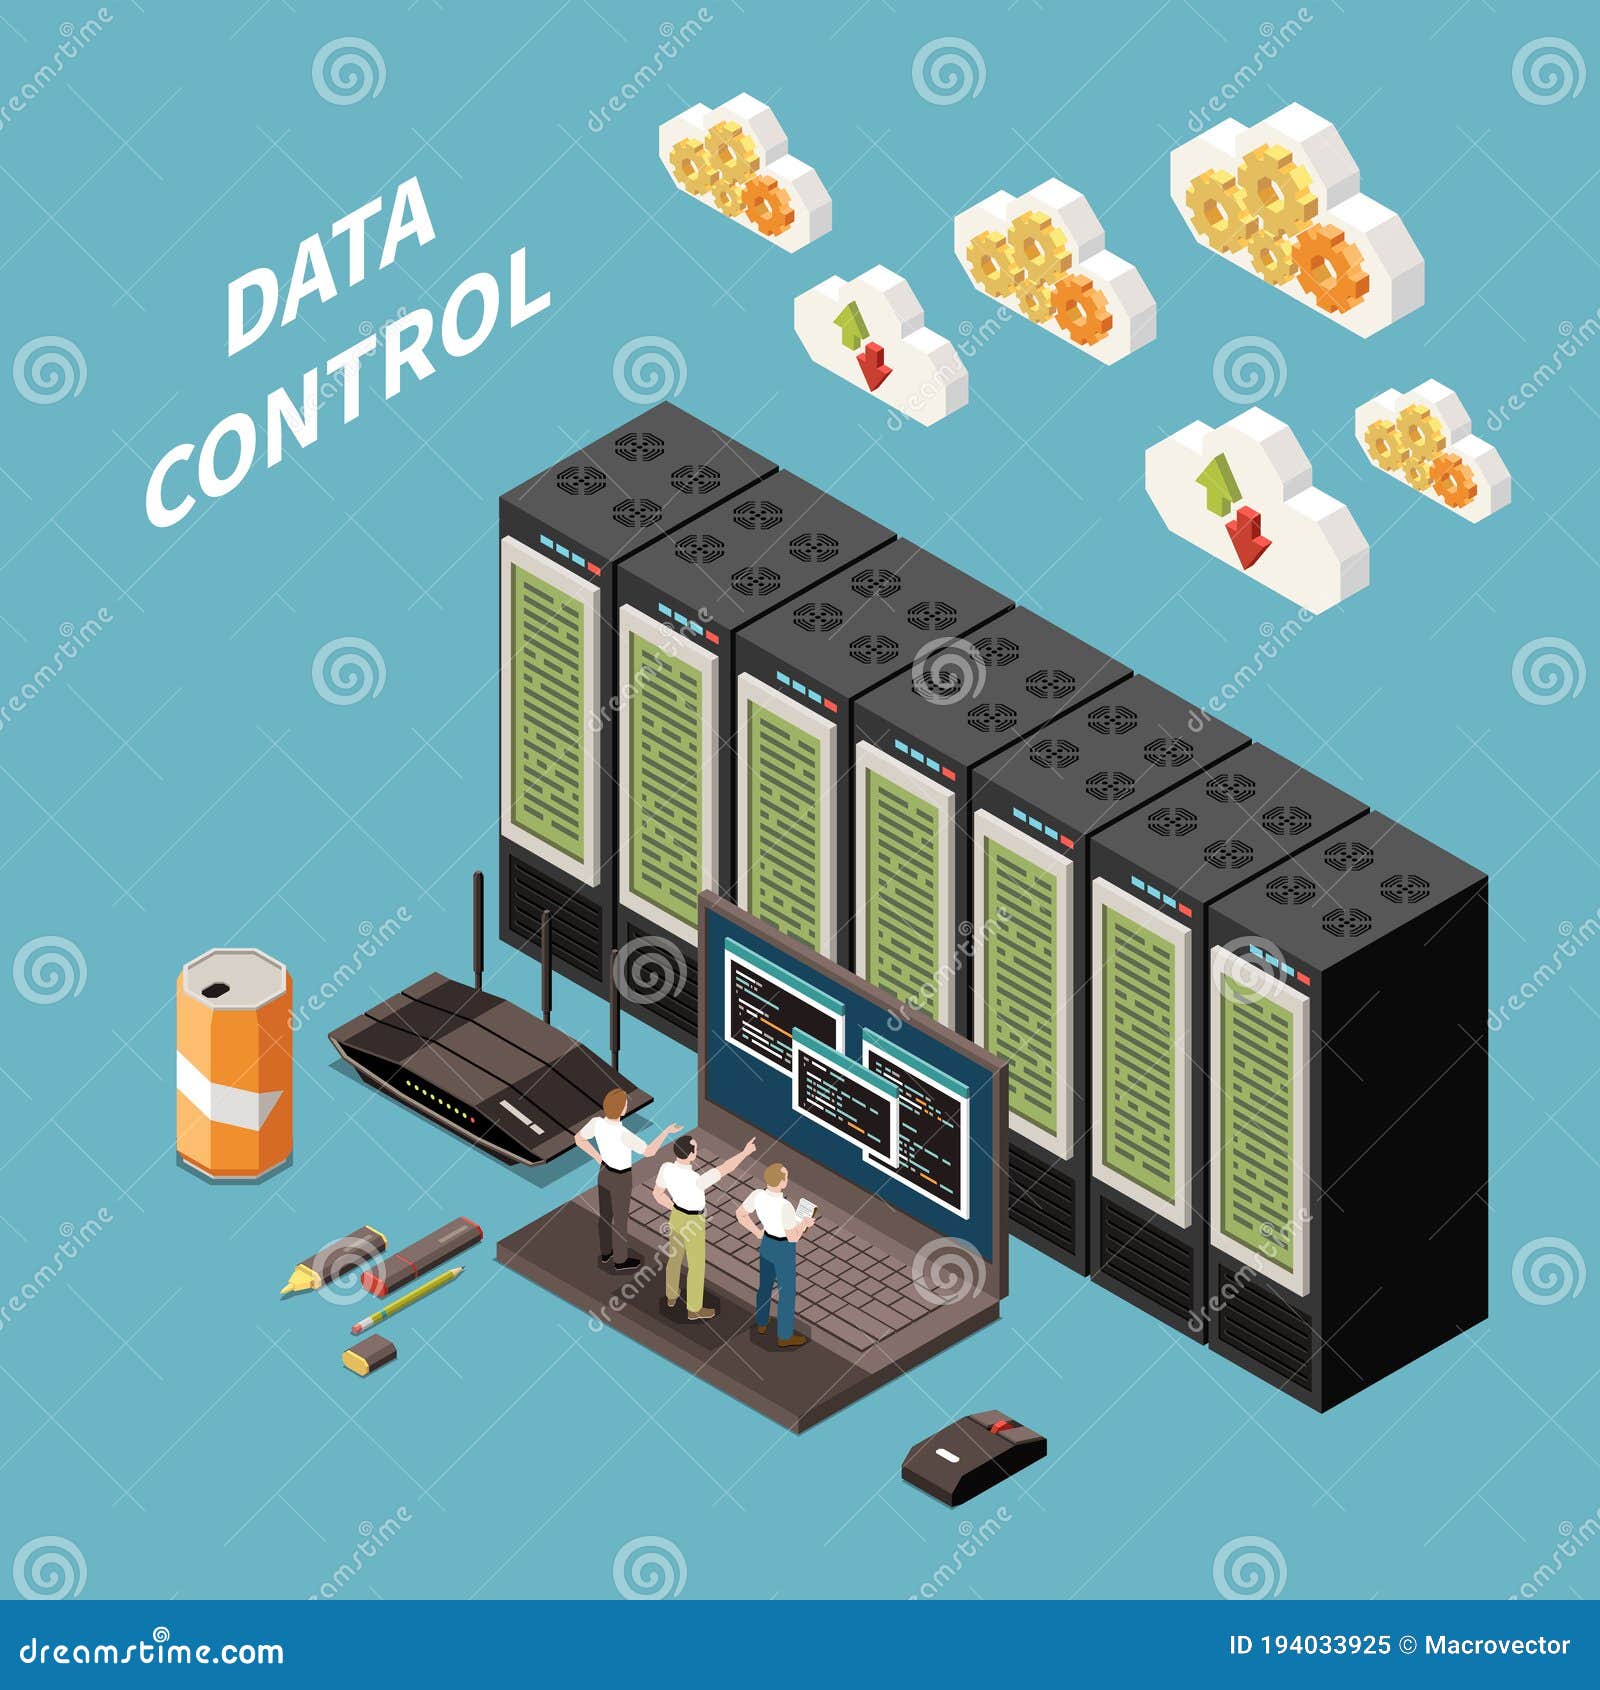 datacenter isometric colored concept